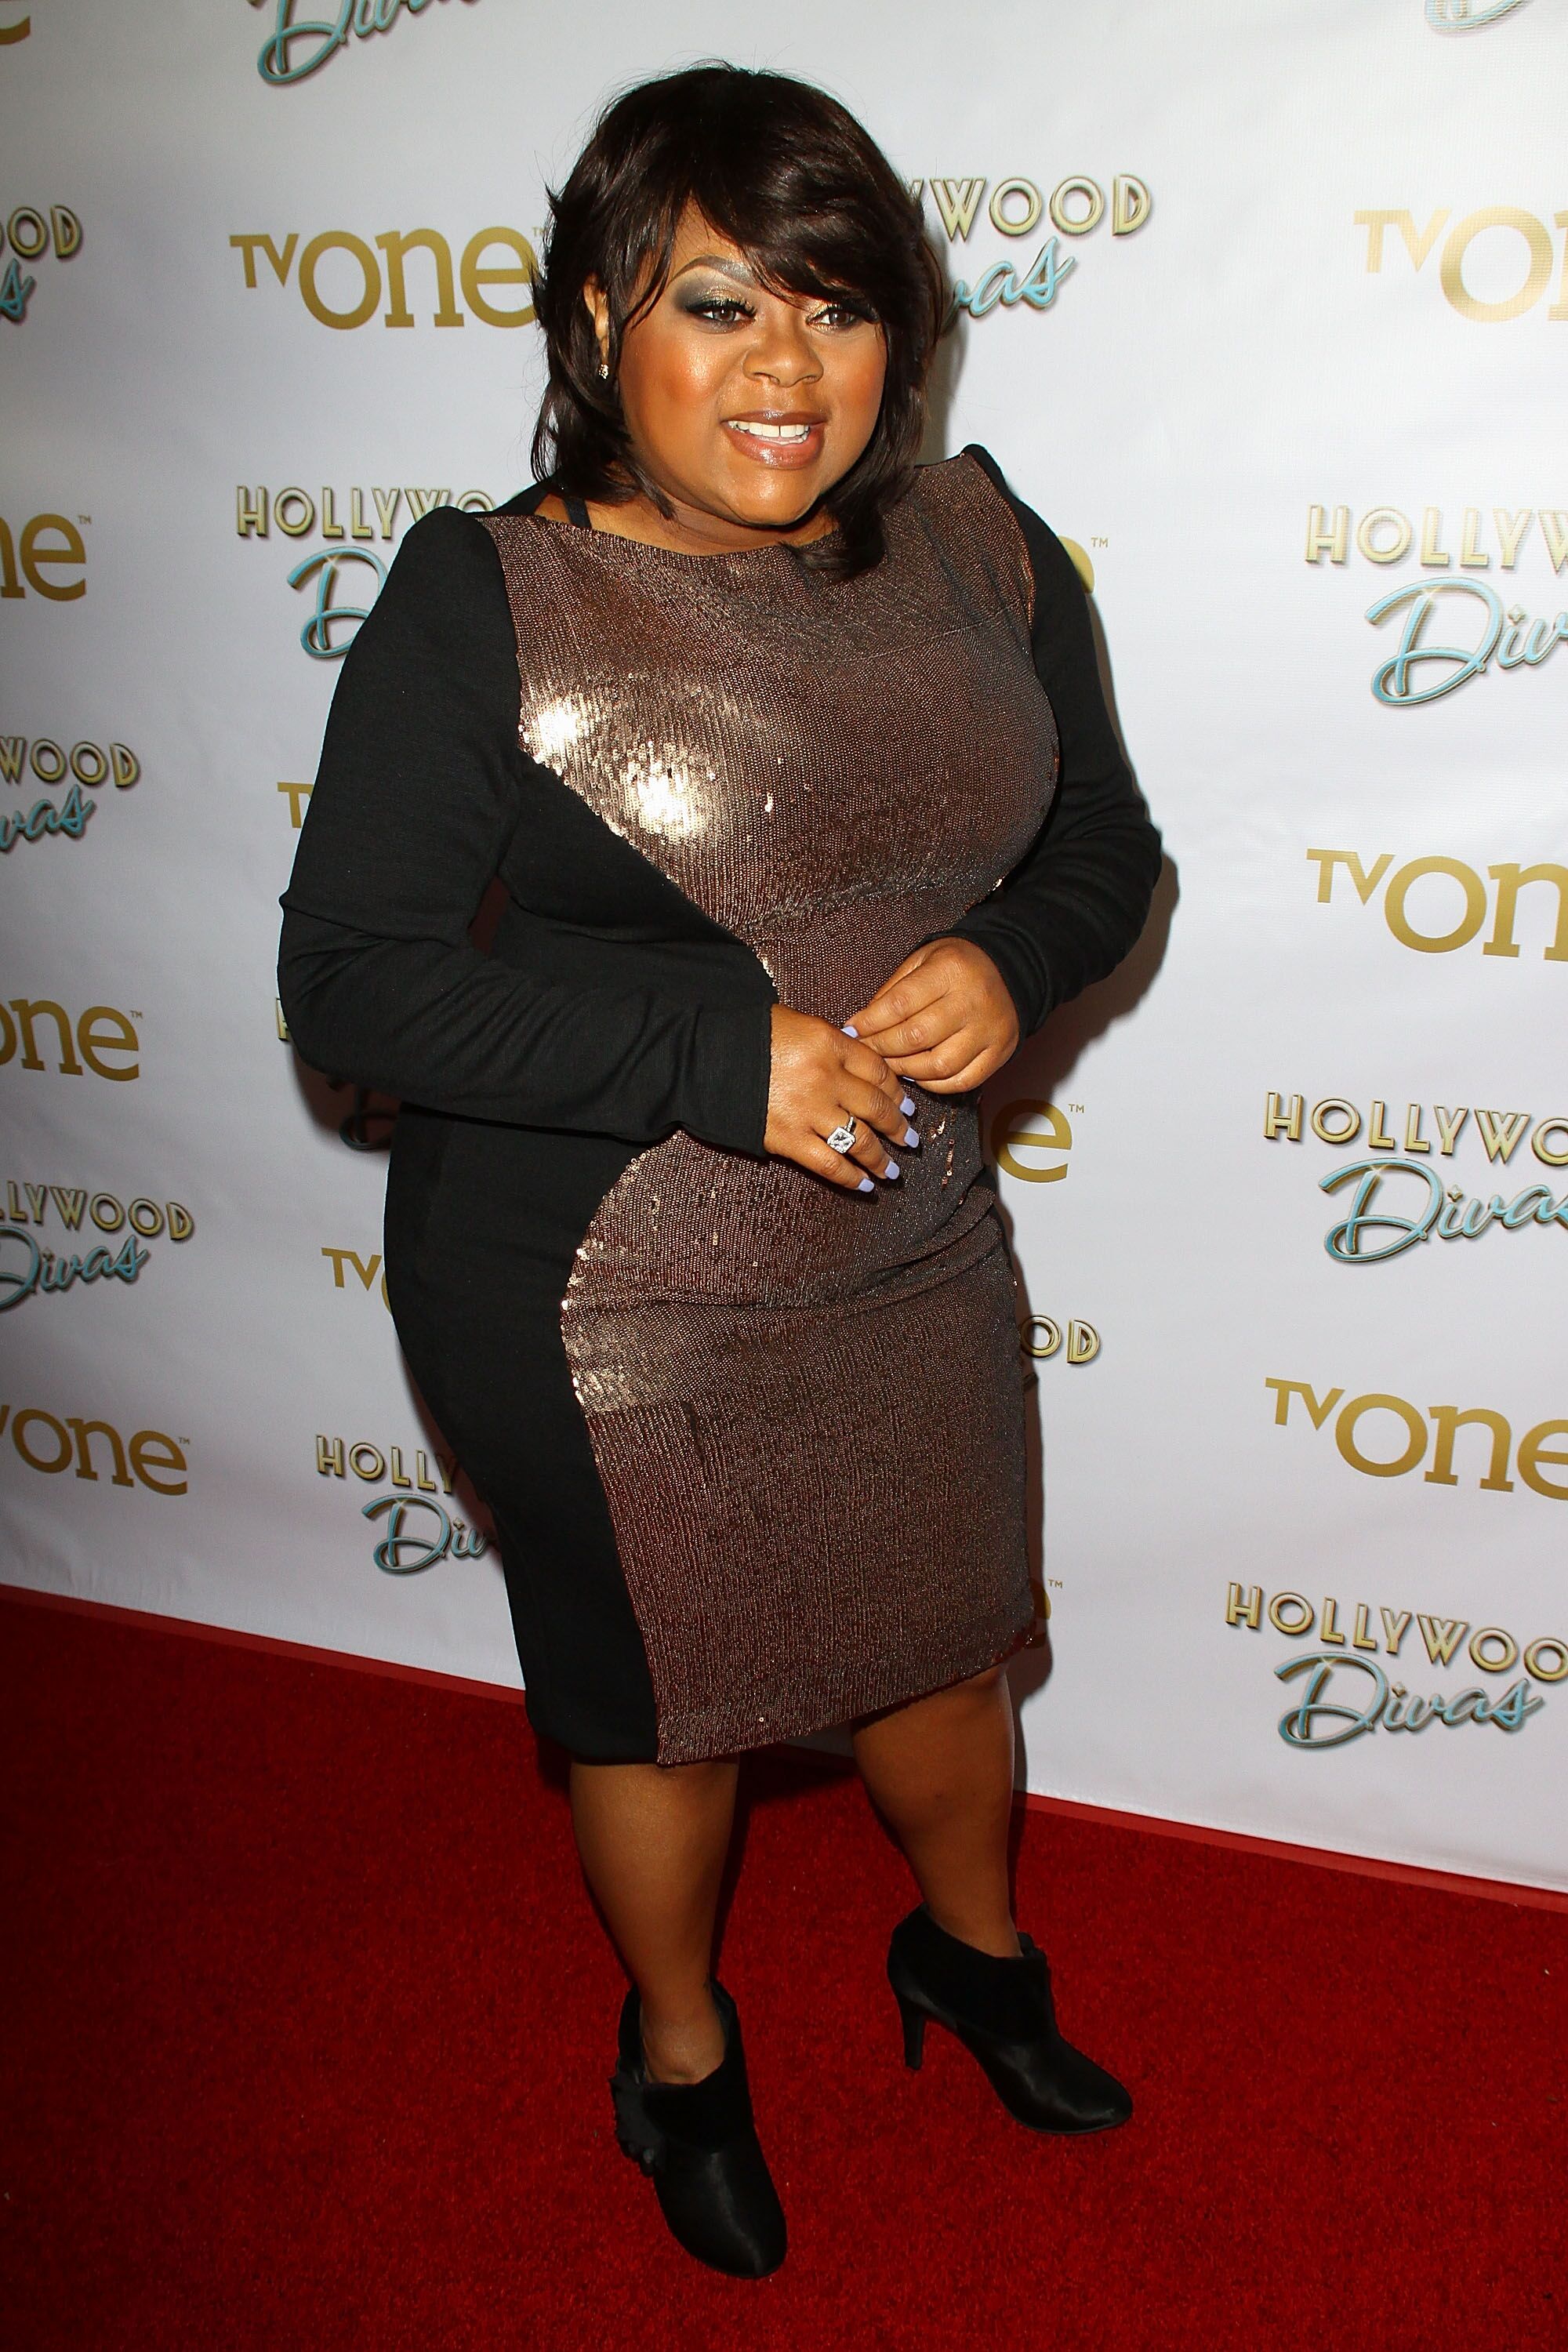 Countess Vaughn attends the premiere party for TV One's "Hollywood Divas" on October 7, 2014 in Hollywood, California. | Source: Getty Images